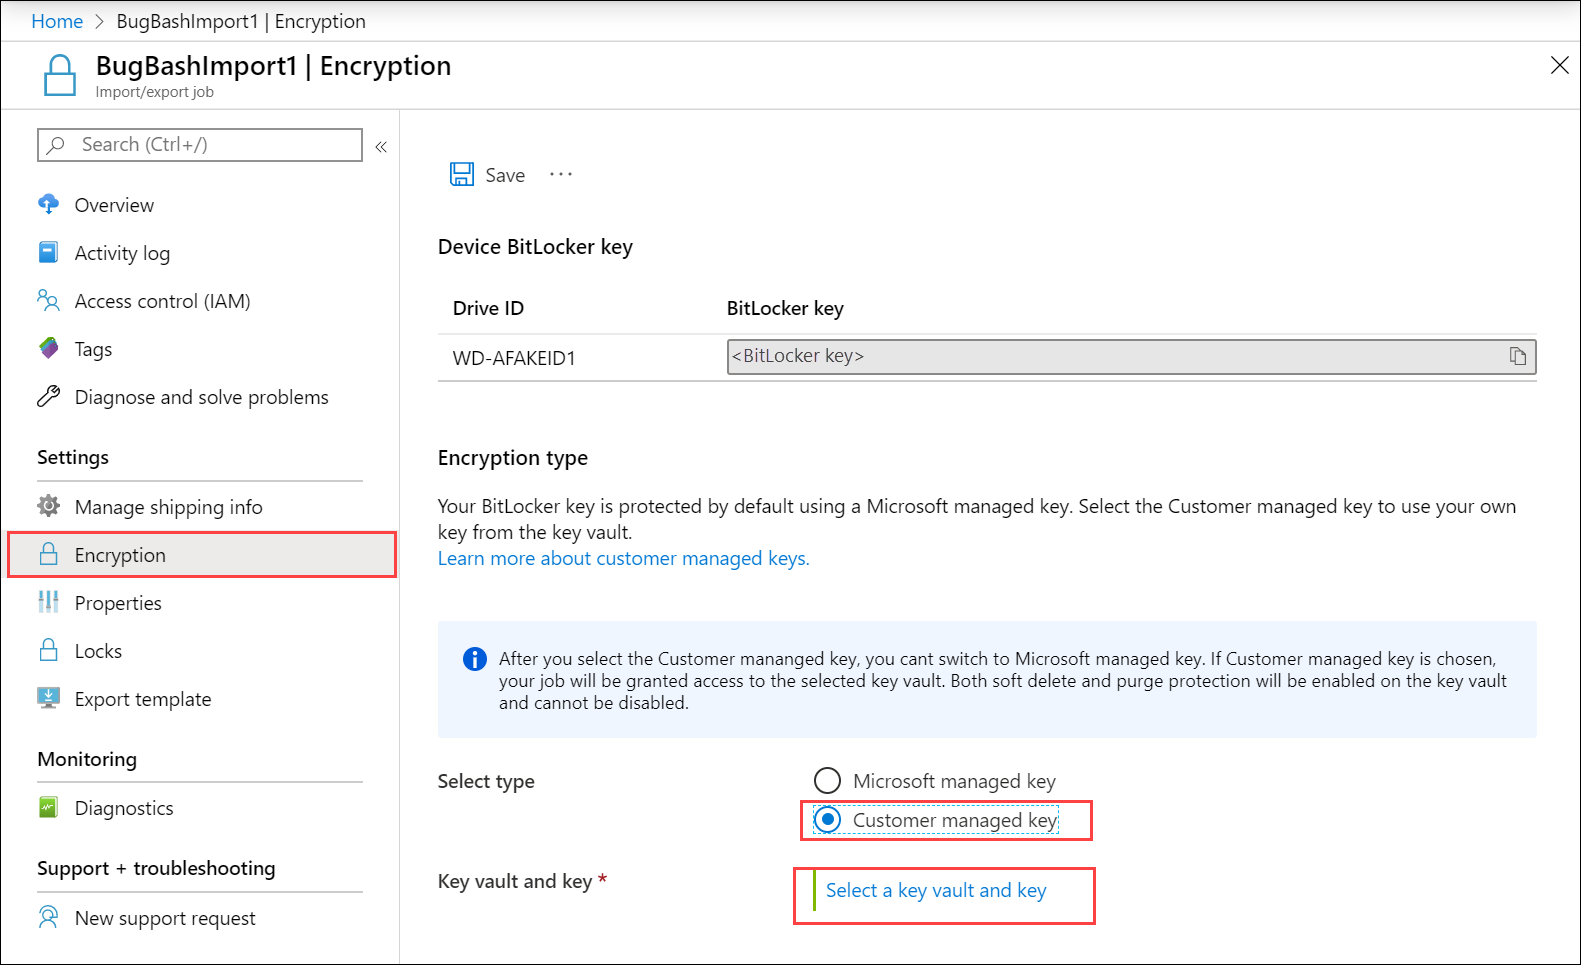 Screenshot of Encryption blade for Azure Import/Export job. "Customer managed key" is selected. Link to "Select a key and key vault" is highlighted.